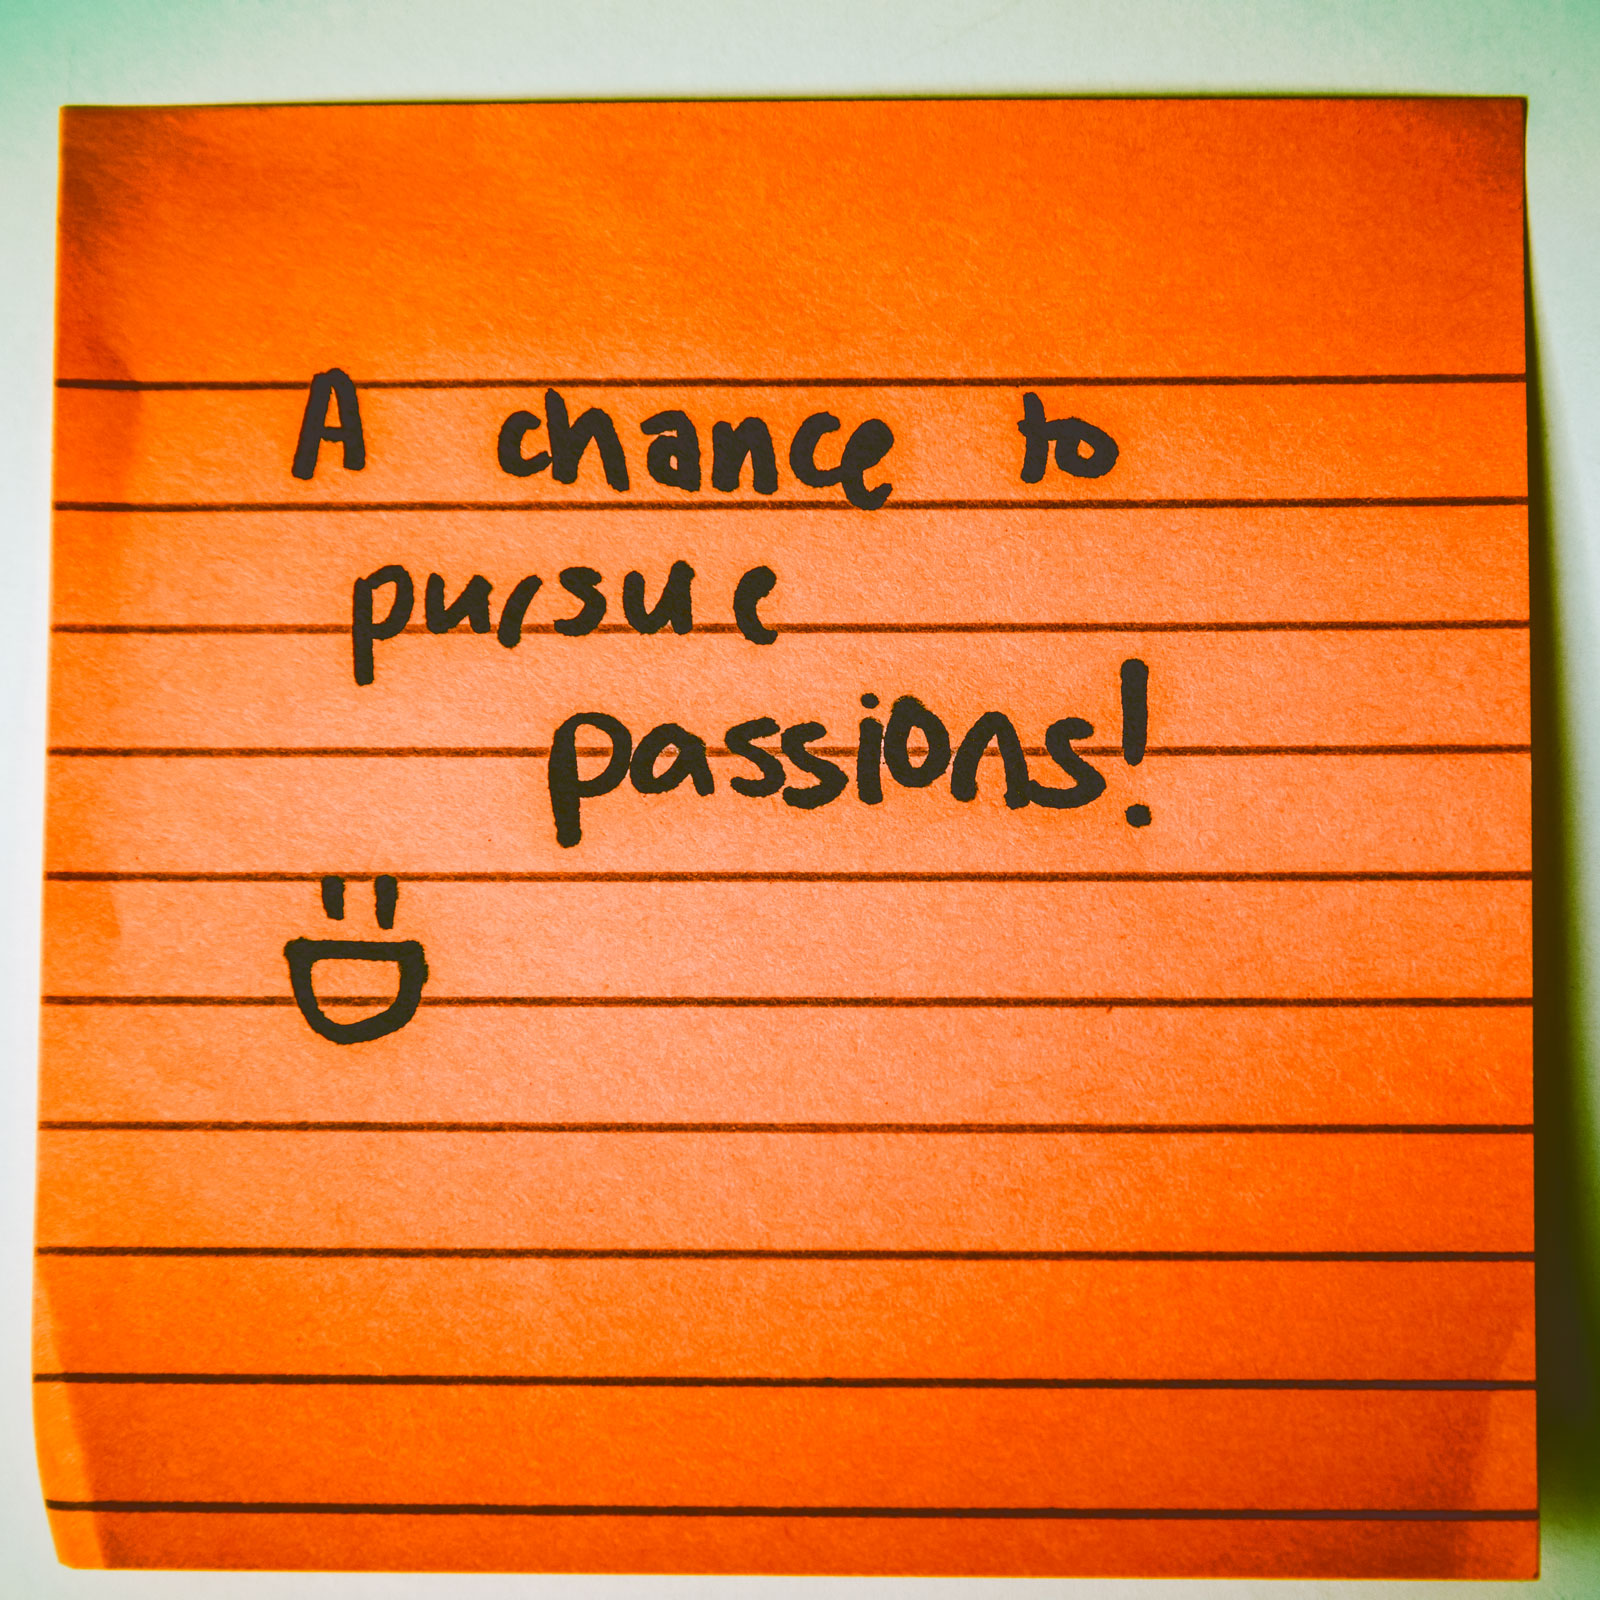 A chance to pursue passions!